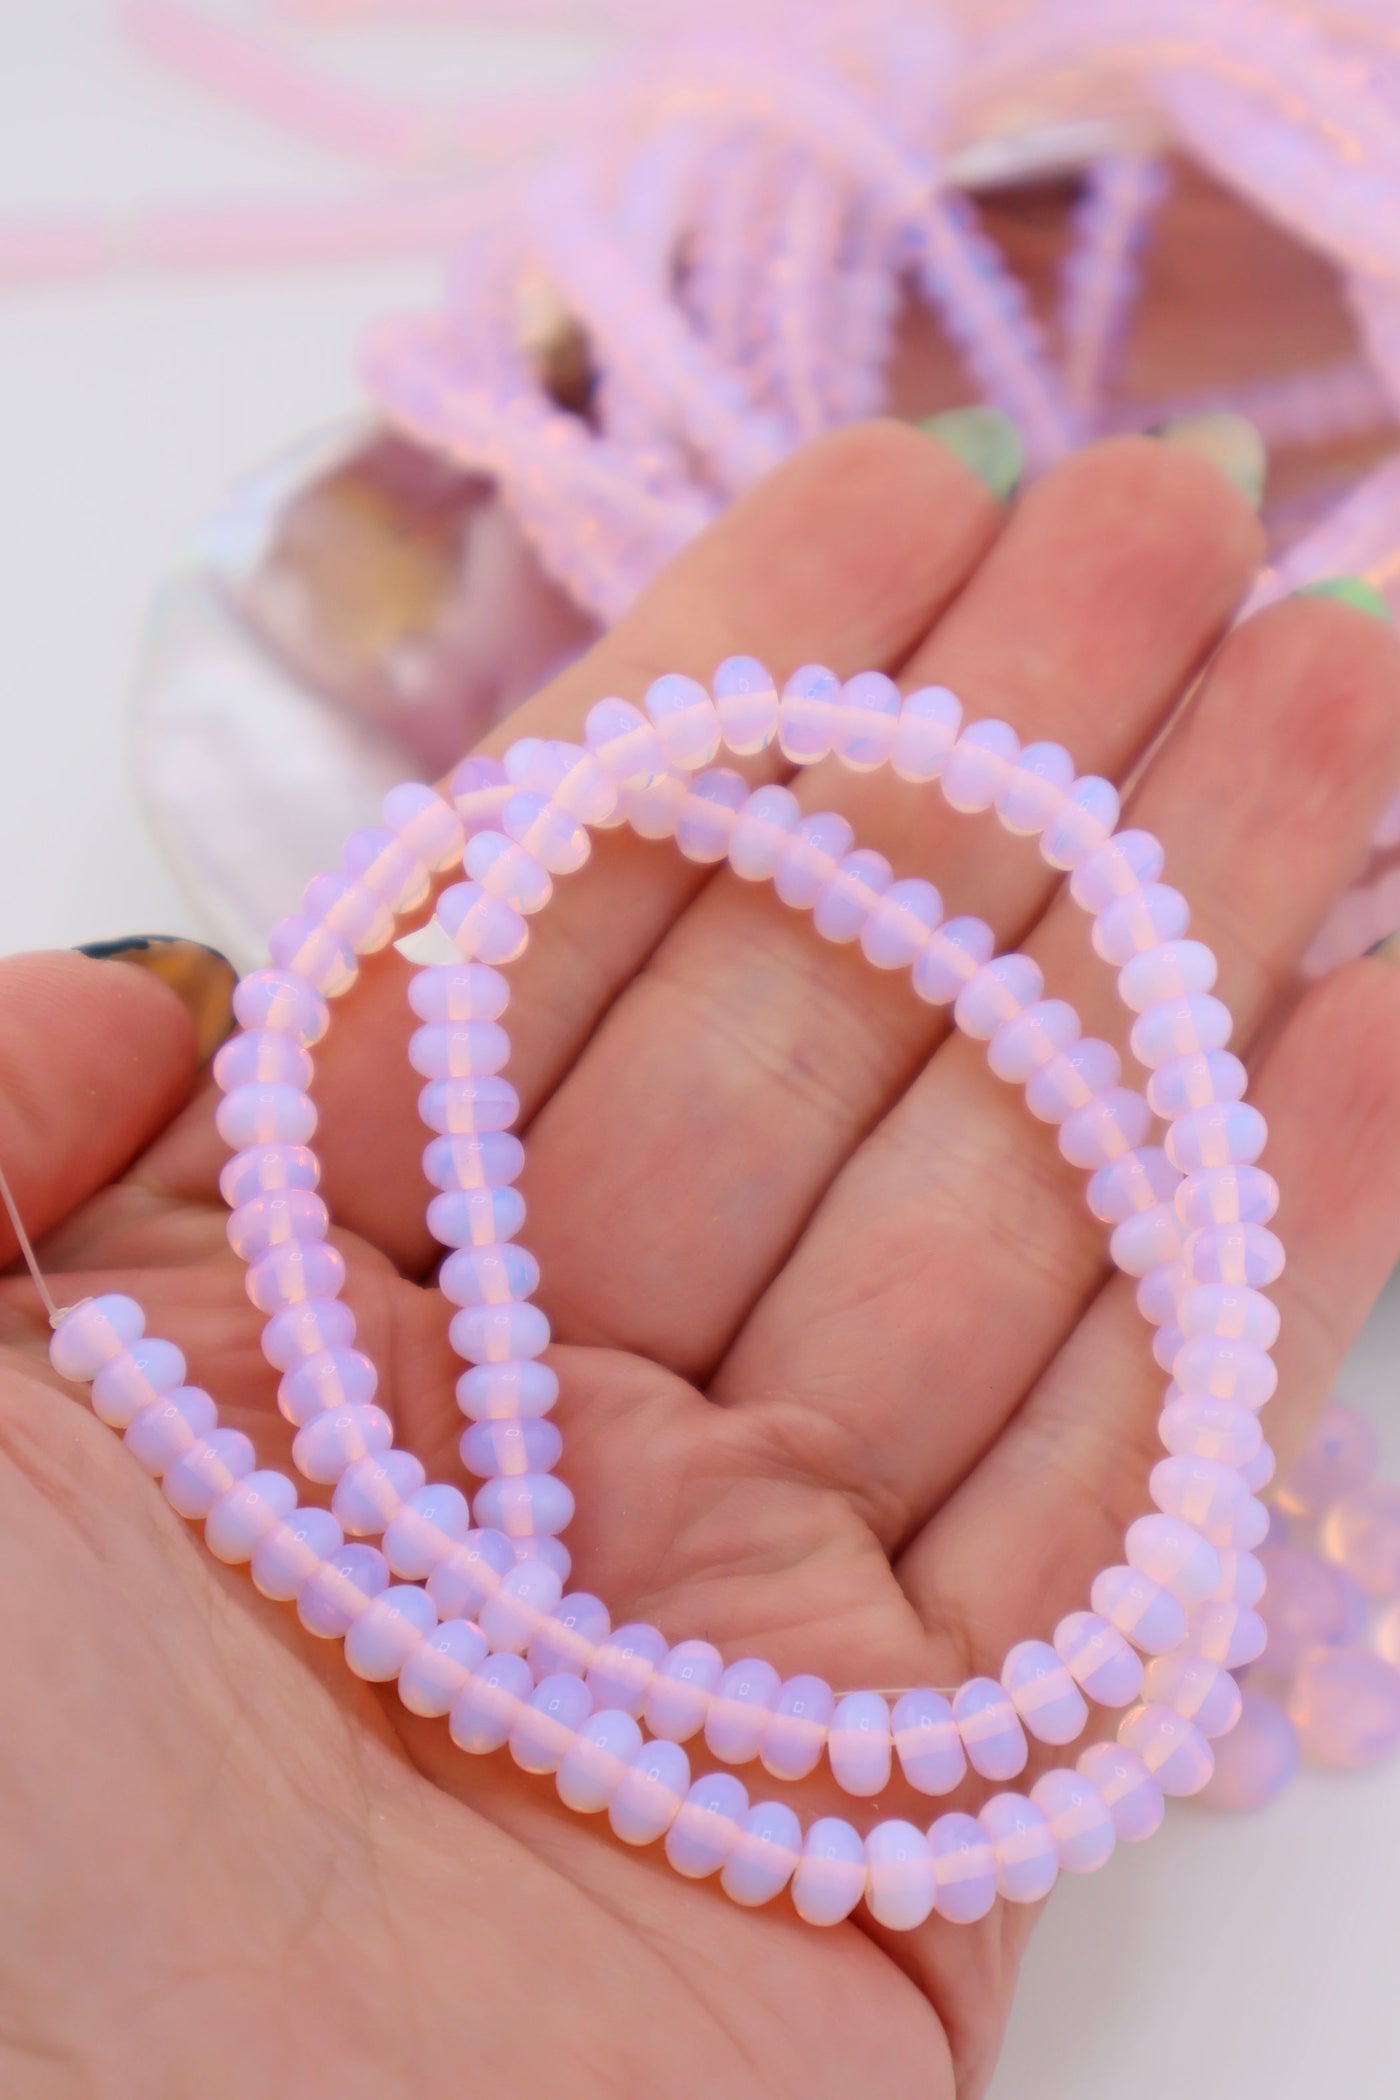 The pastel pink in these jellyfish opalite beads is great for jellyfish DIY aesthetic jewelry